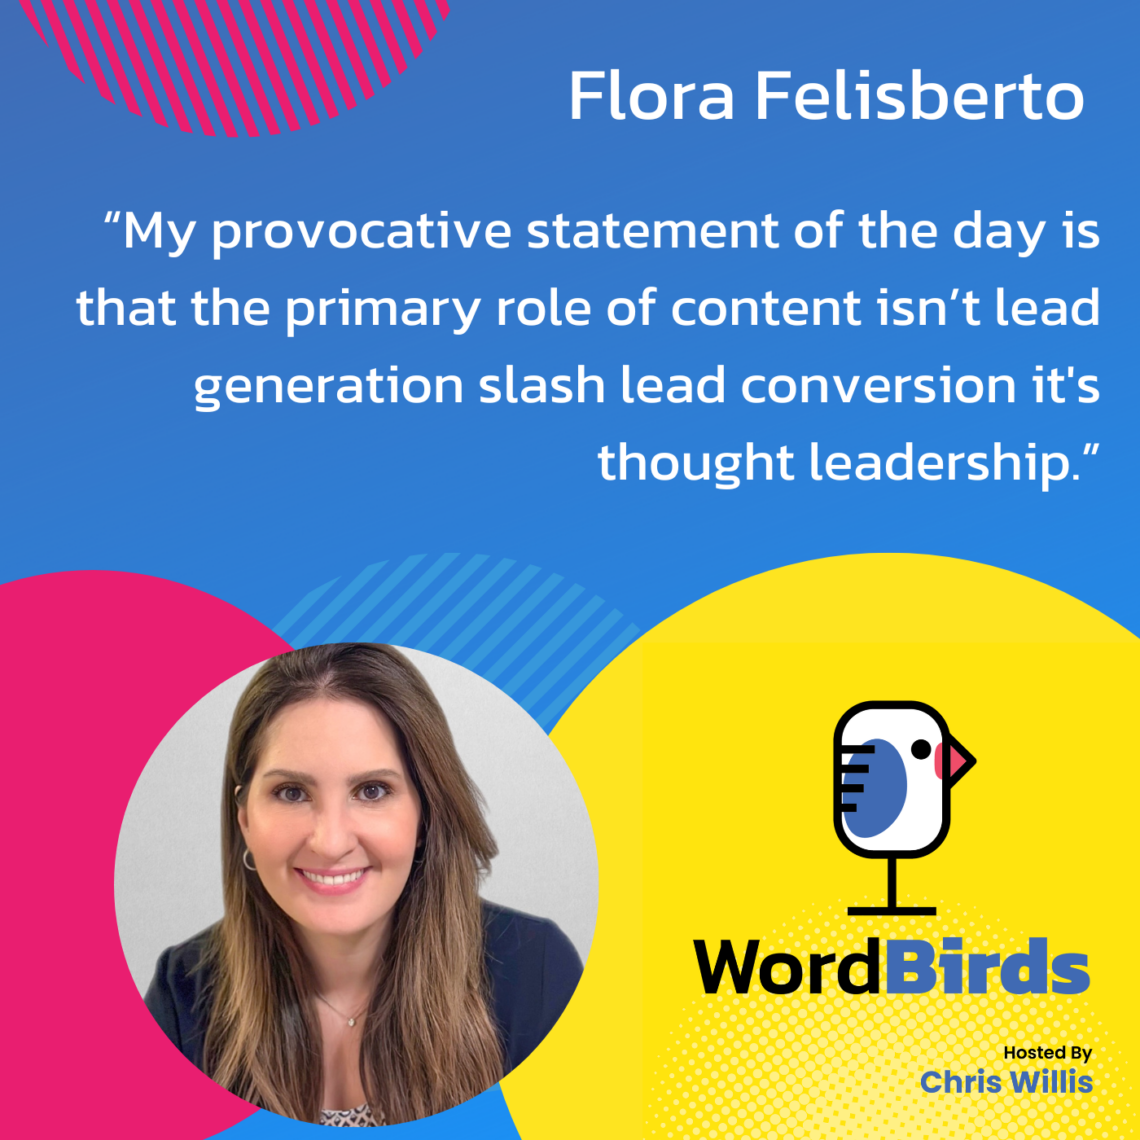 On a blue background there's a quote from Flora Felisberto in white that takes up the majority of the image. The bottom of the image has a headshot image of Flora and the WordBirds Podcast logo.